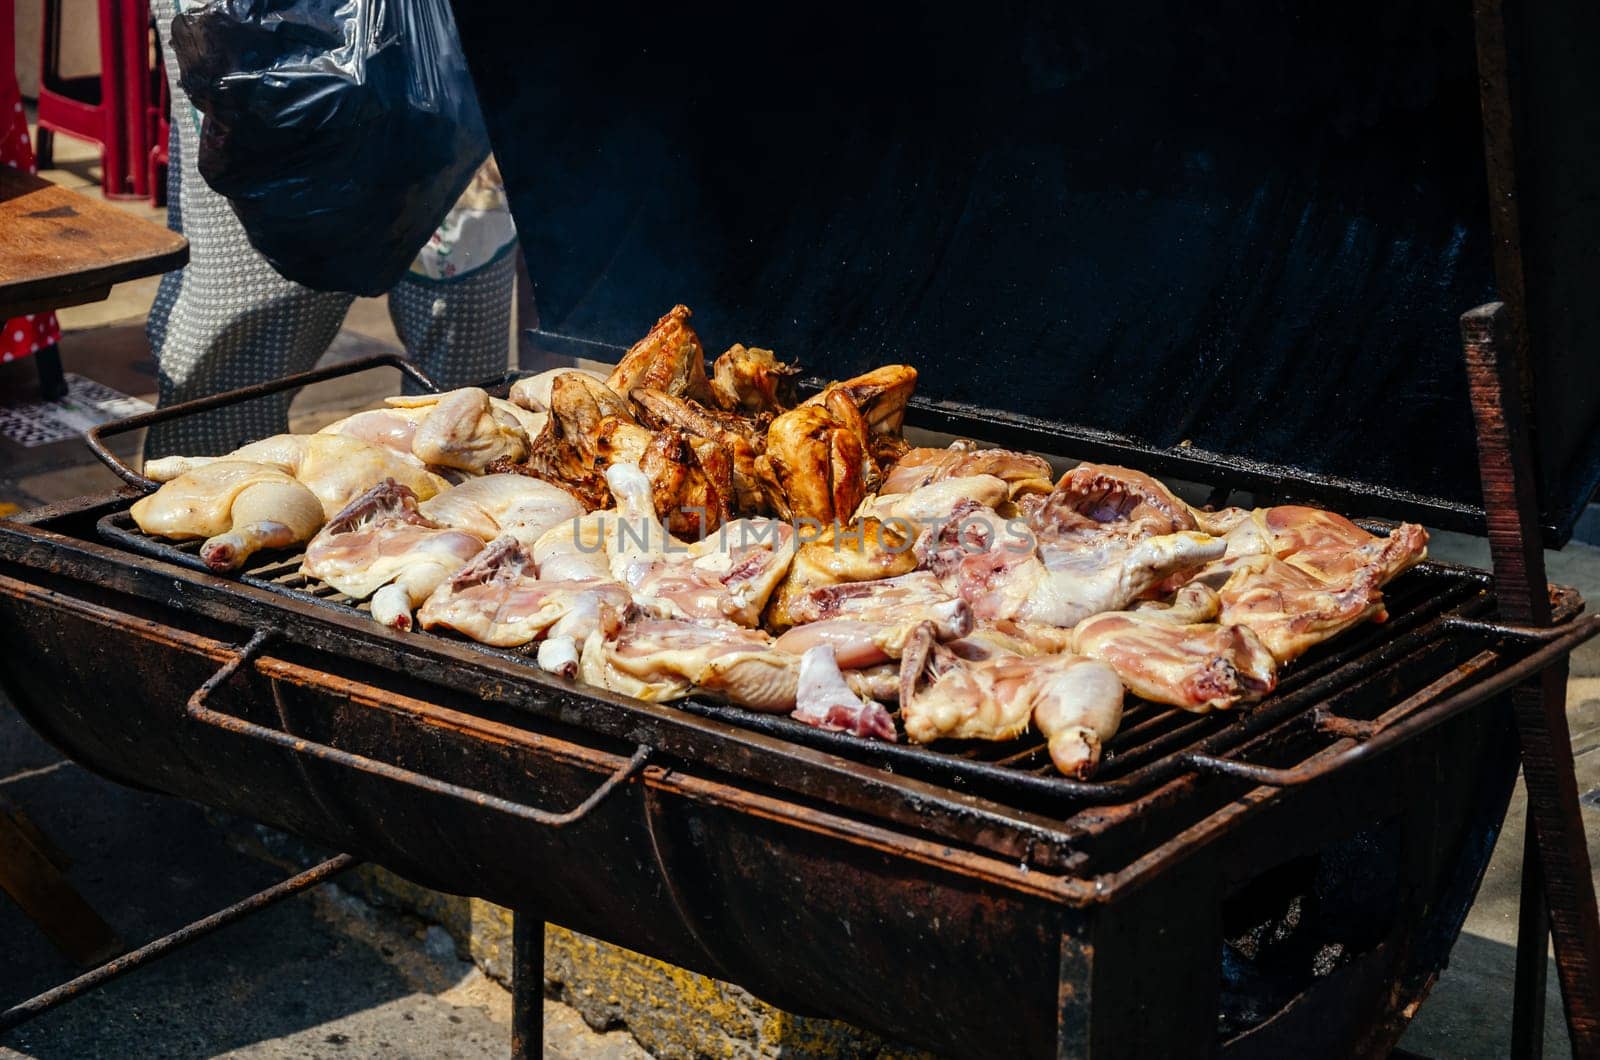 Chicken wing being grilled on a charcoal stove with smoke. Street food